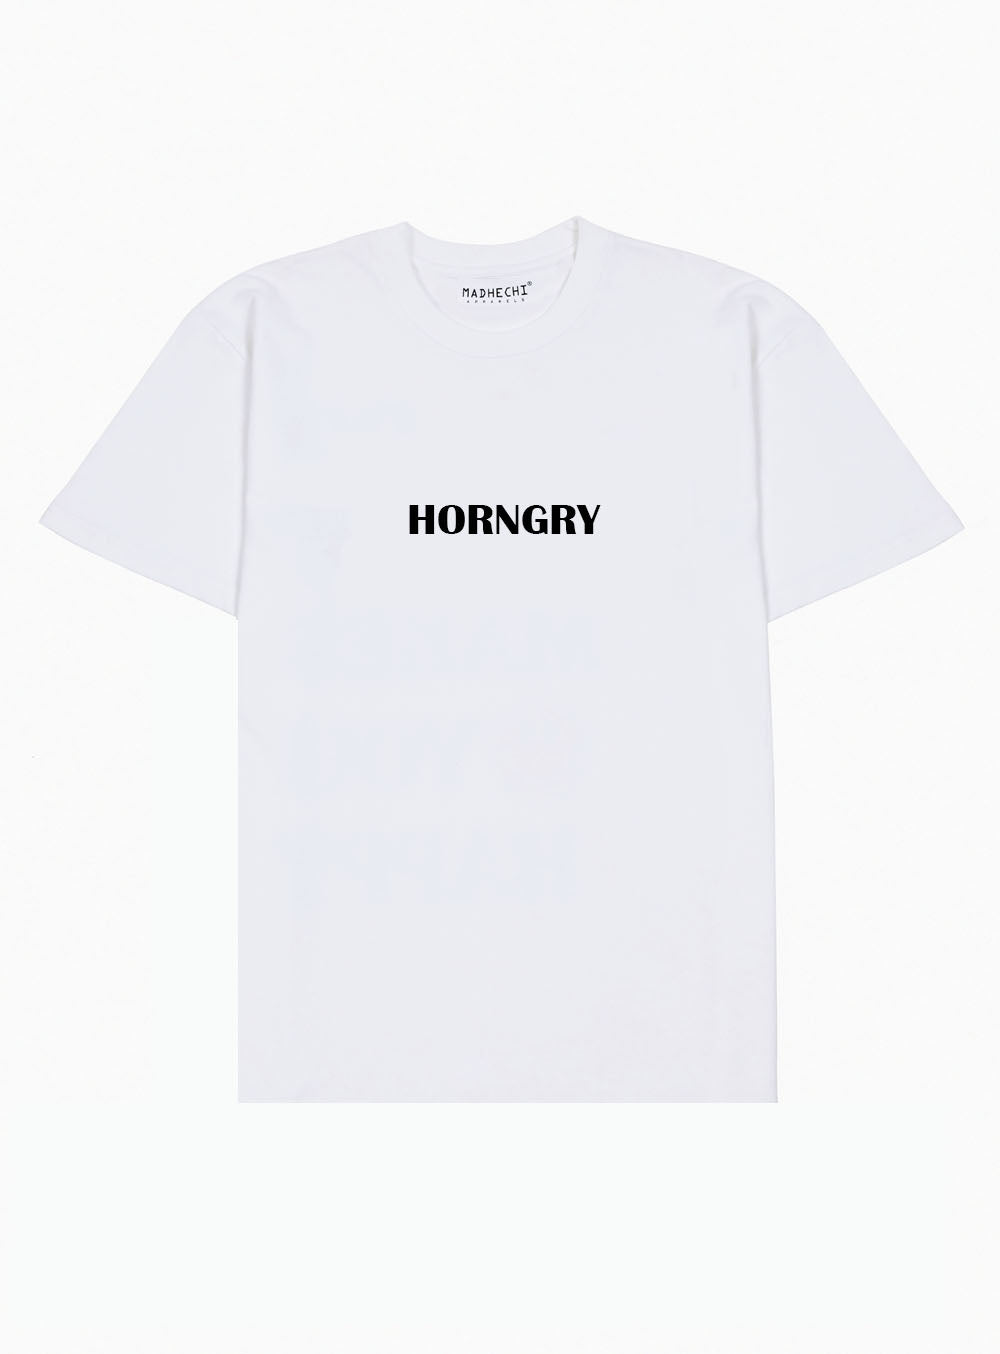 Horngry Oversized White T-Shirt